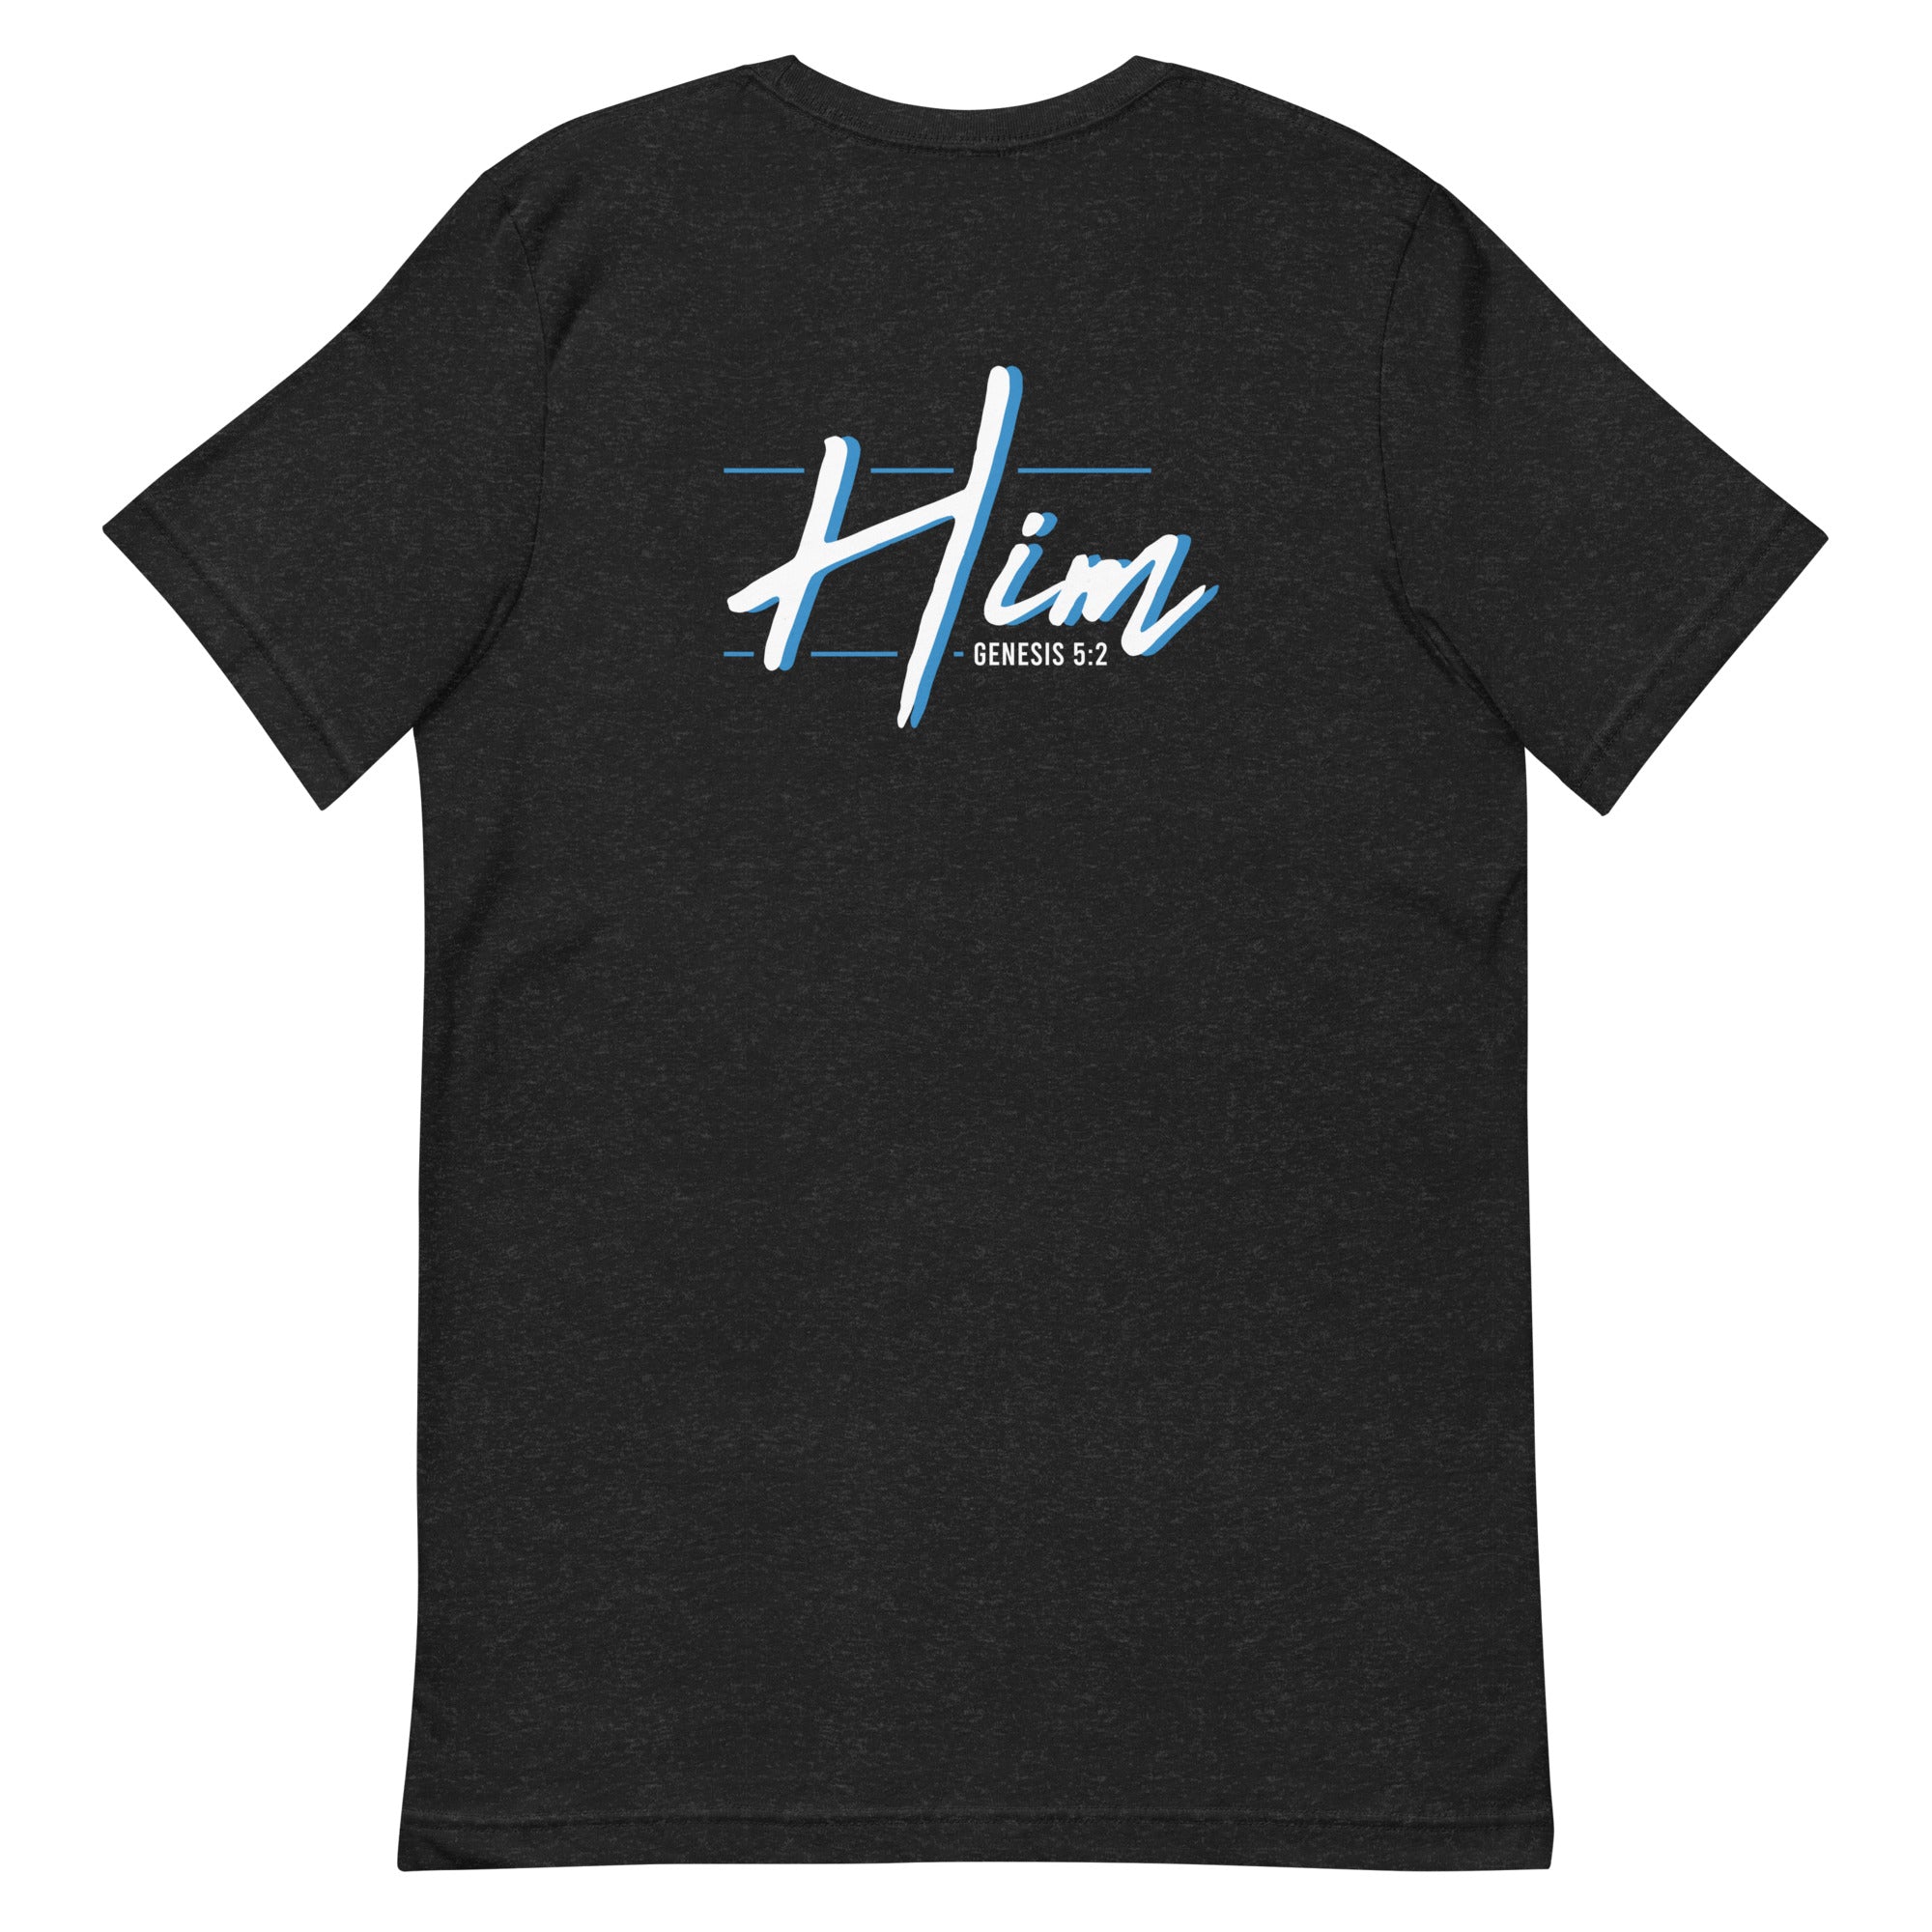 I AM HIM MENS FRONT AND BACK T-SHIRT